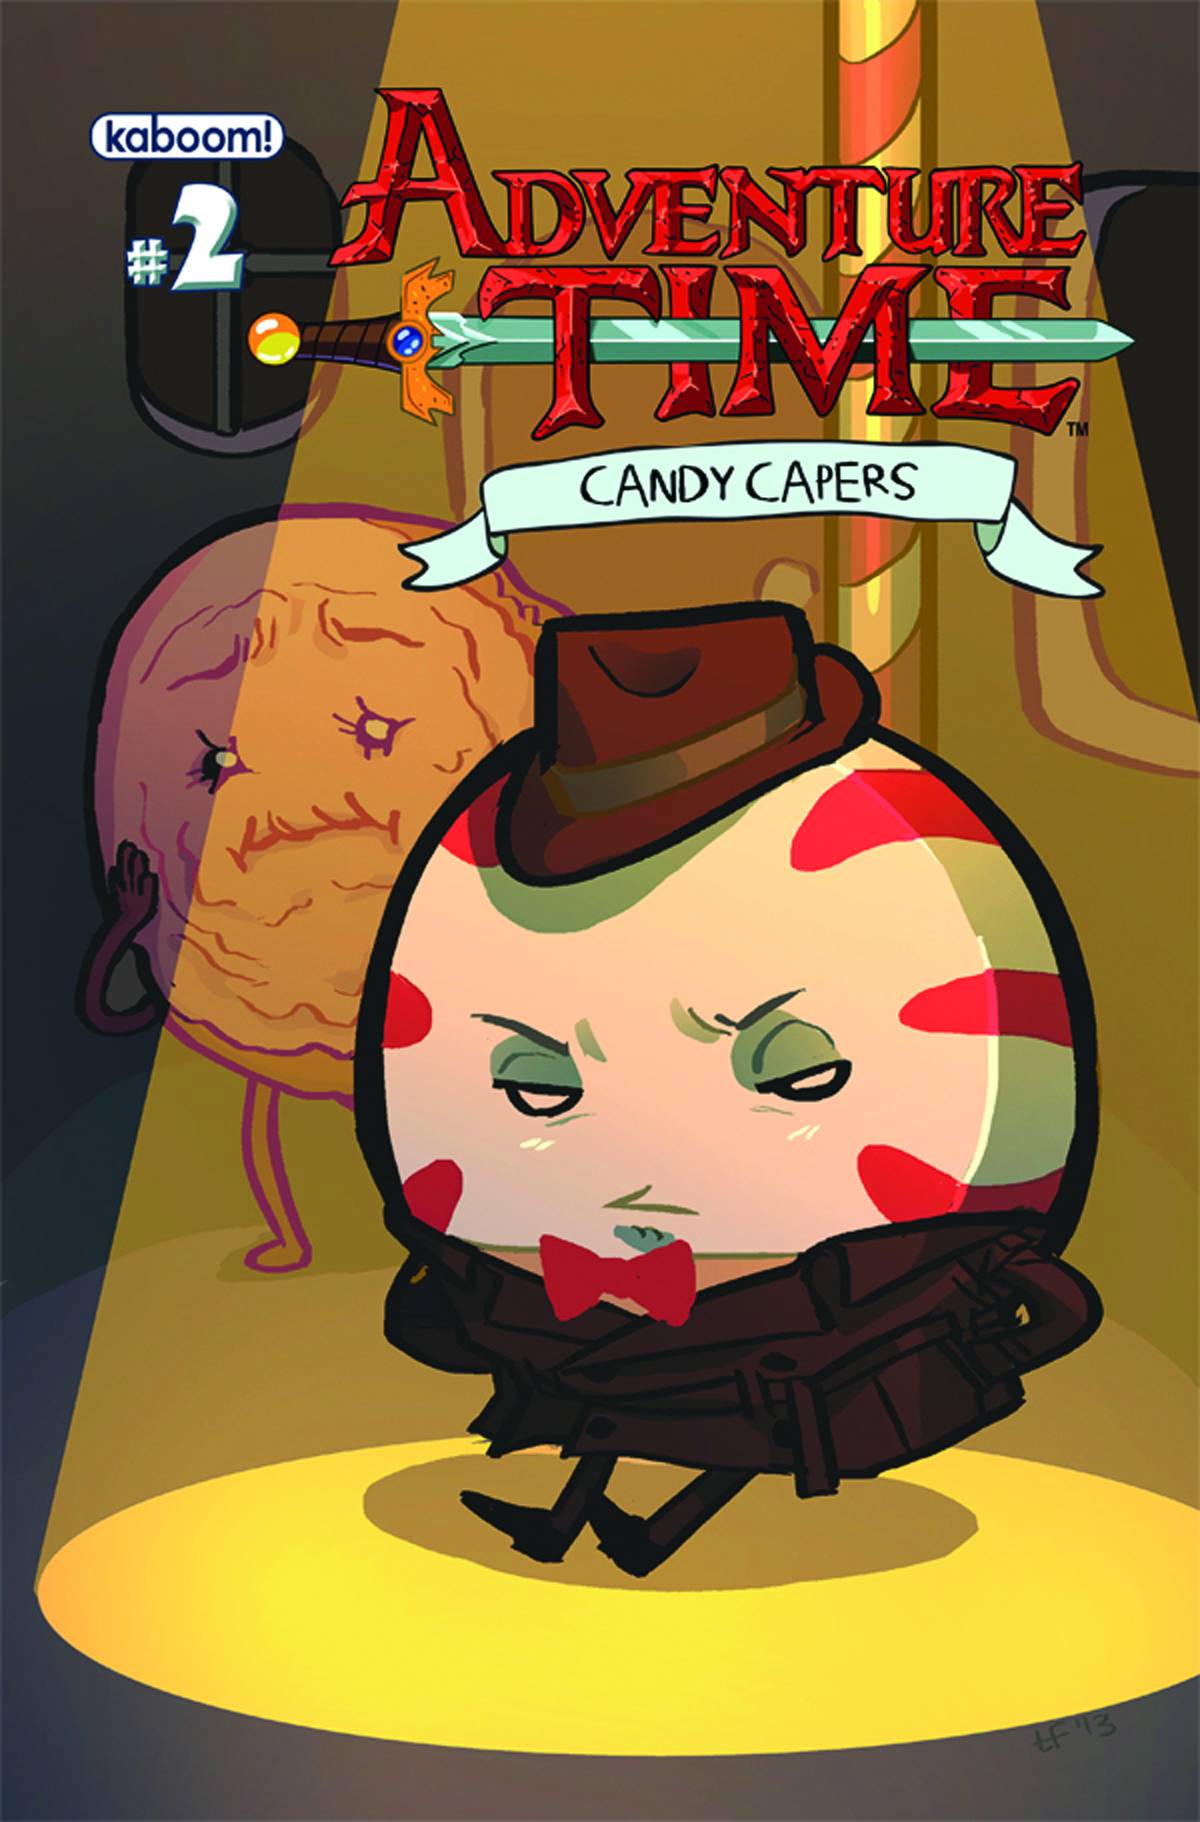 Adventure Time Candy Capers #2